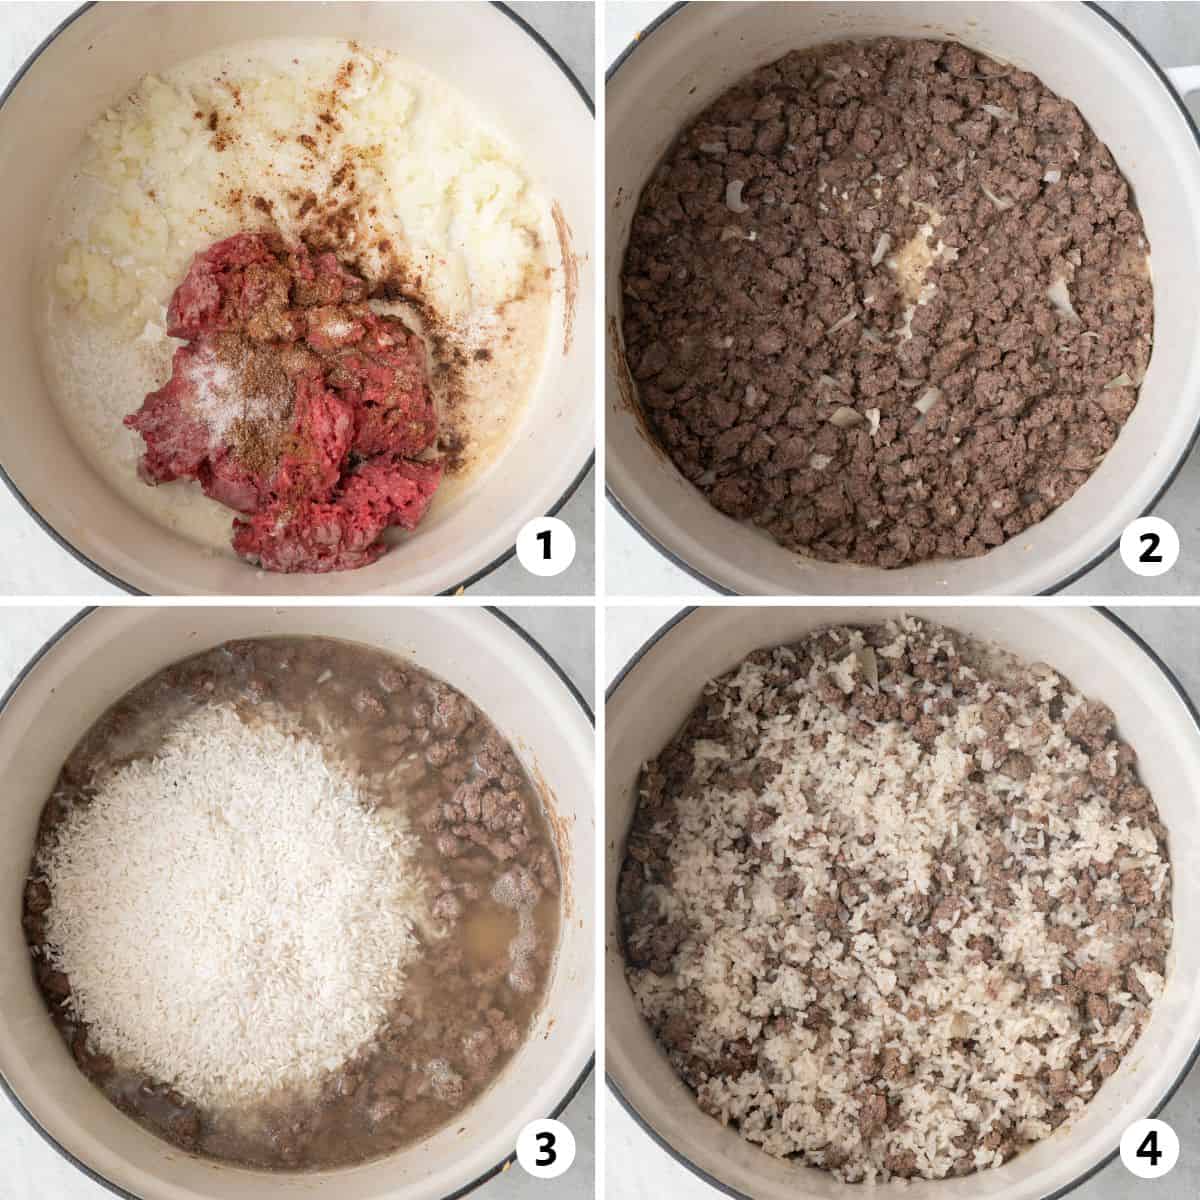 4 image collage preparing the other part of the recipe: 1- ground beef, onions and seasoning in a pot before cooking, 2- after cooking, 3- rice and liquid added, 4- after cooked and rice fluffed.